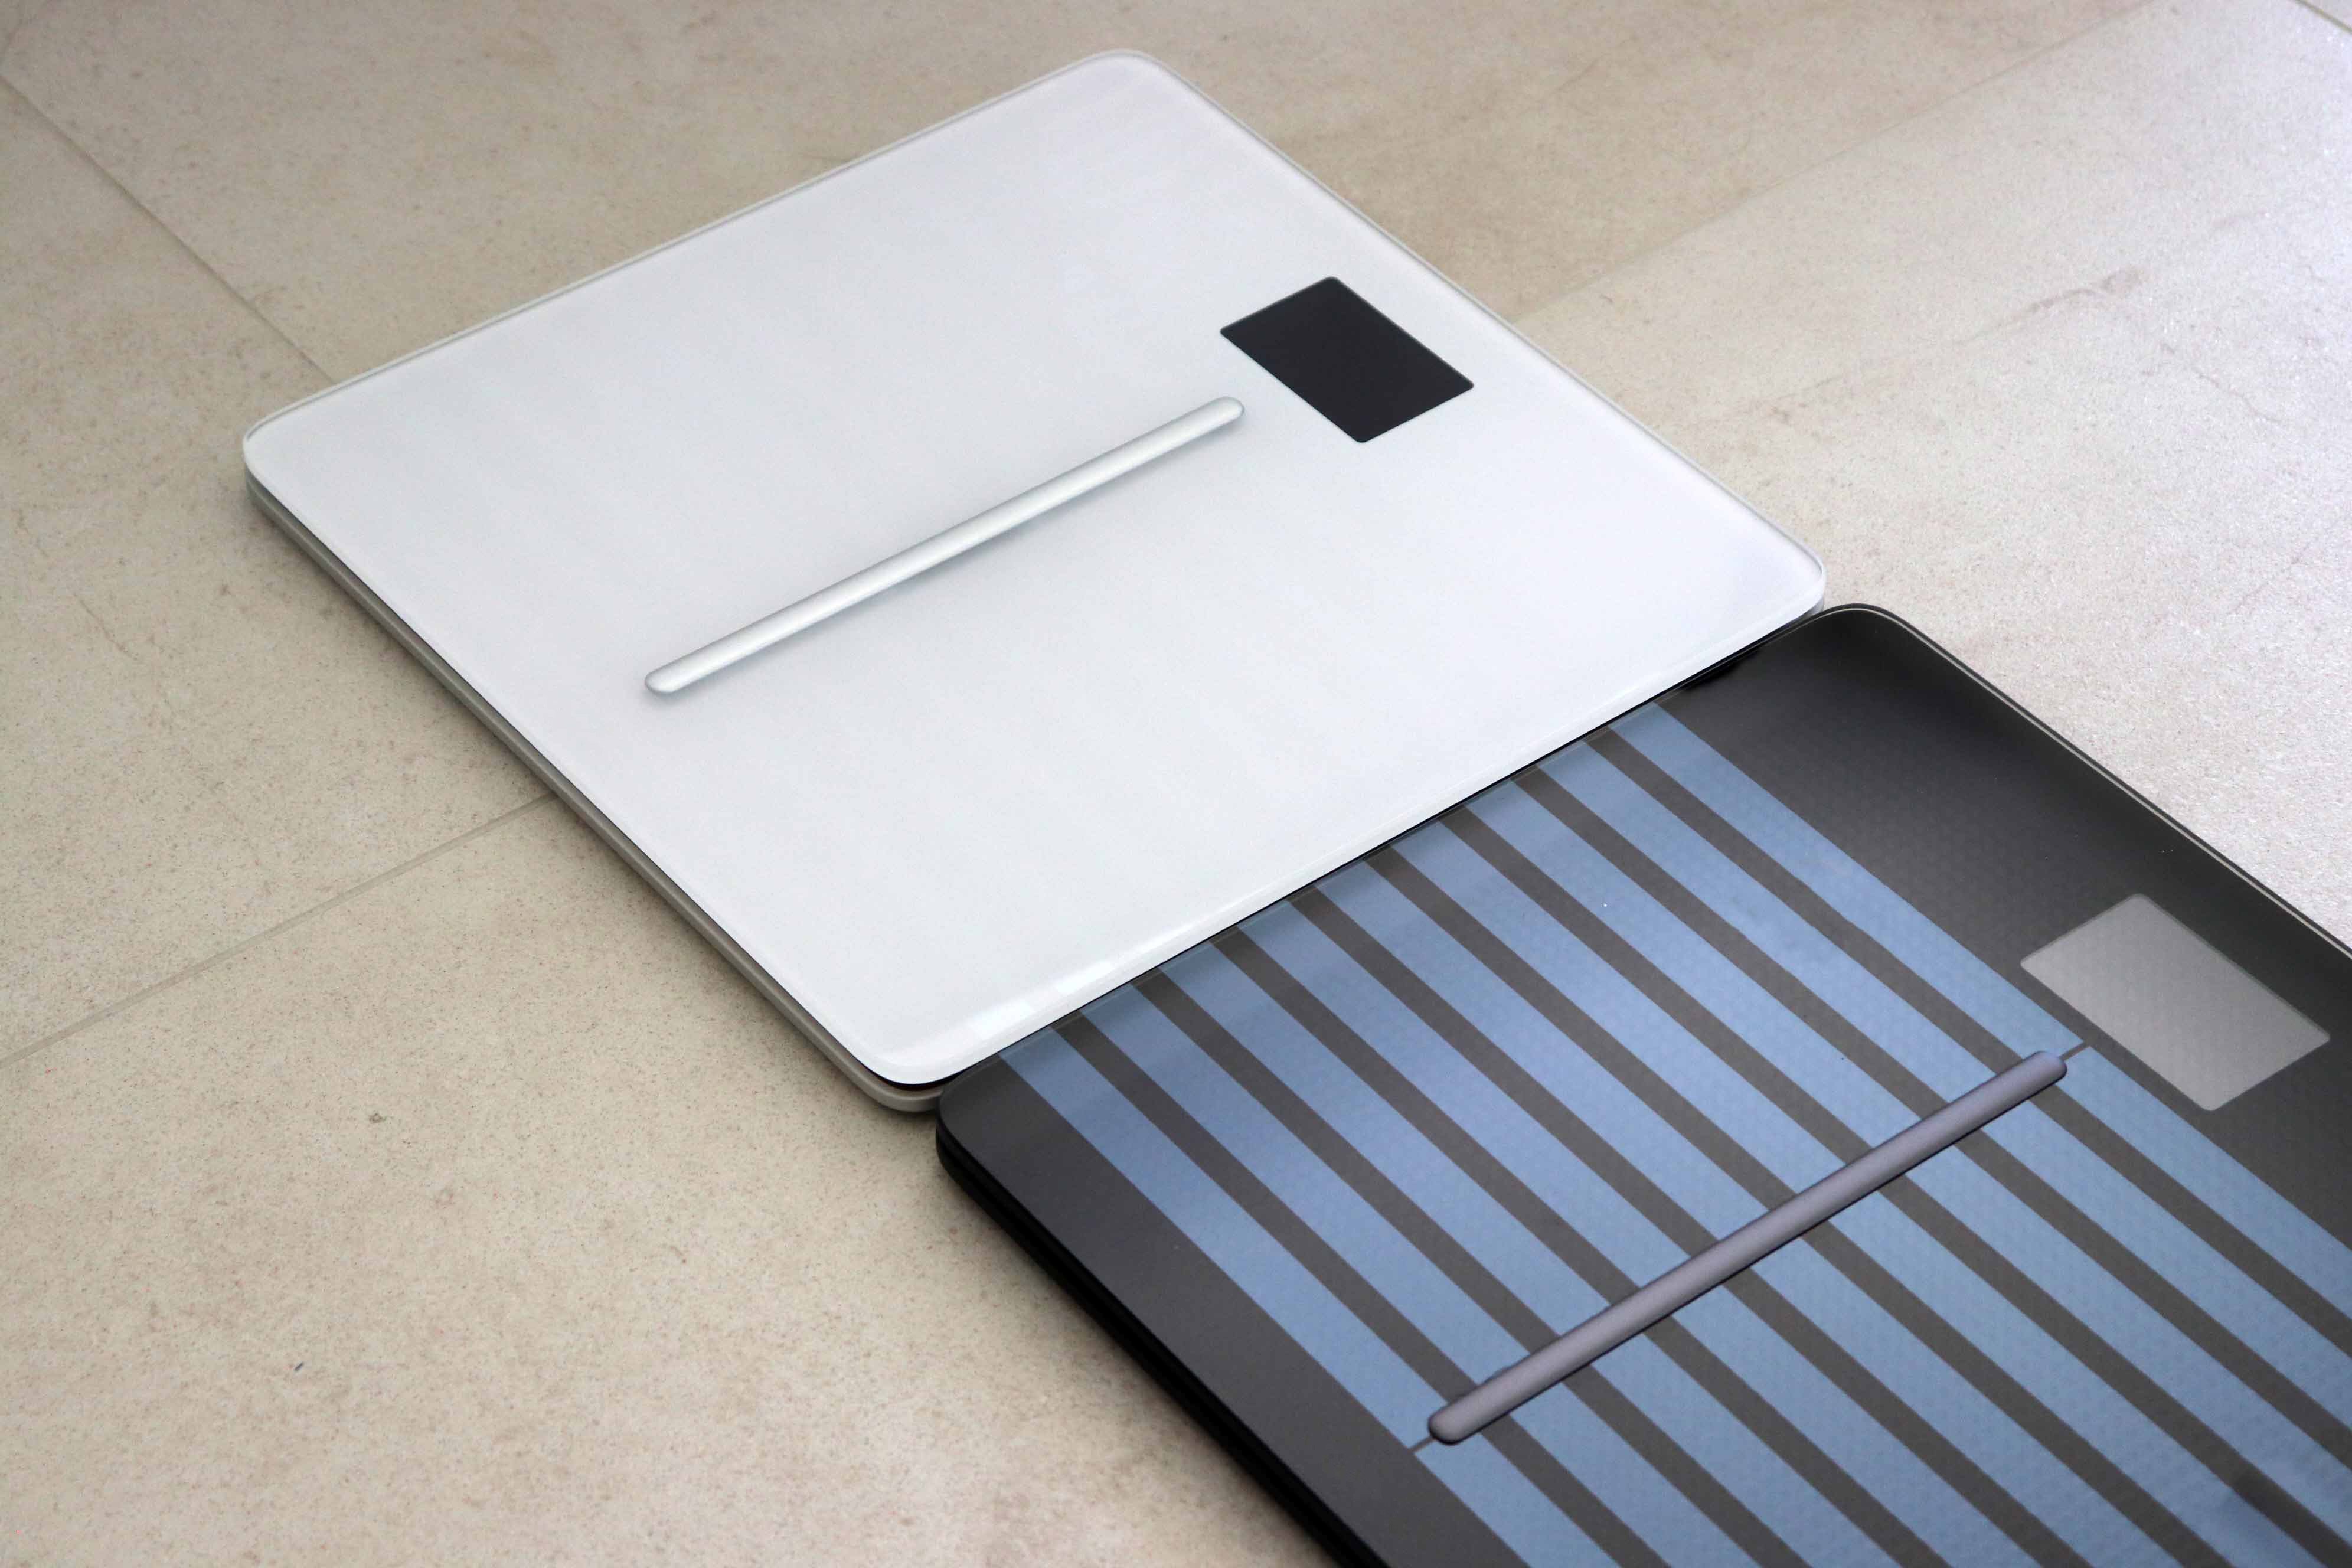 Withings Body Cardio Scale review: Withings Body Cardio is a smart